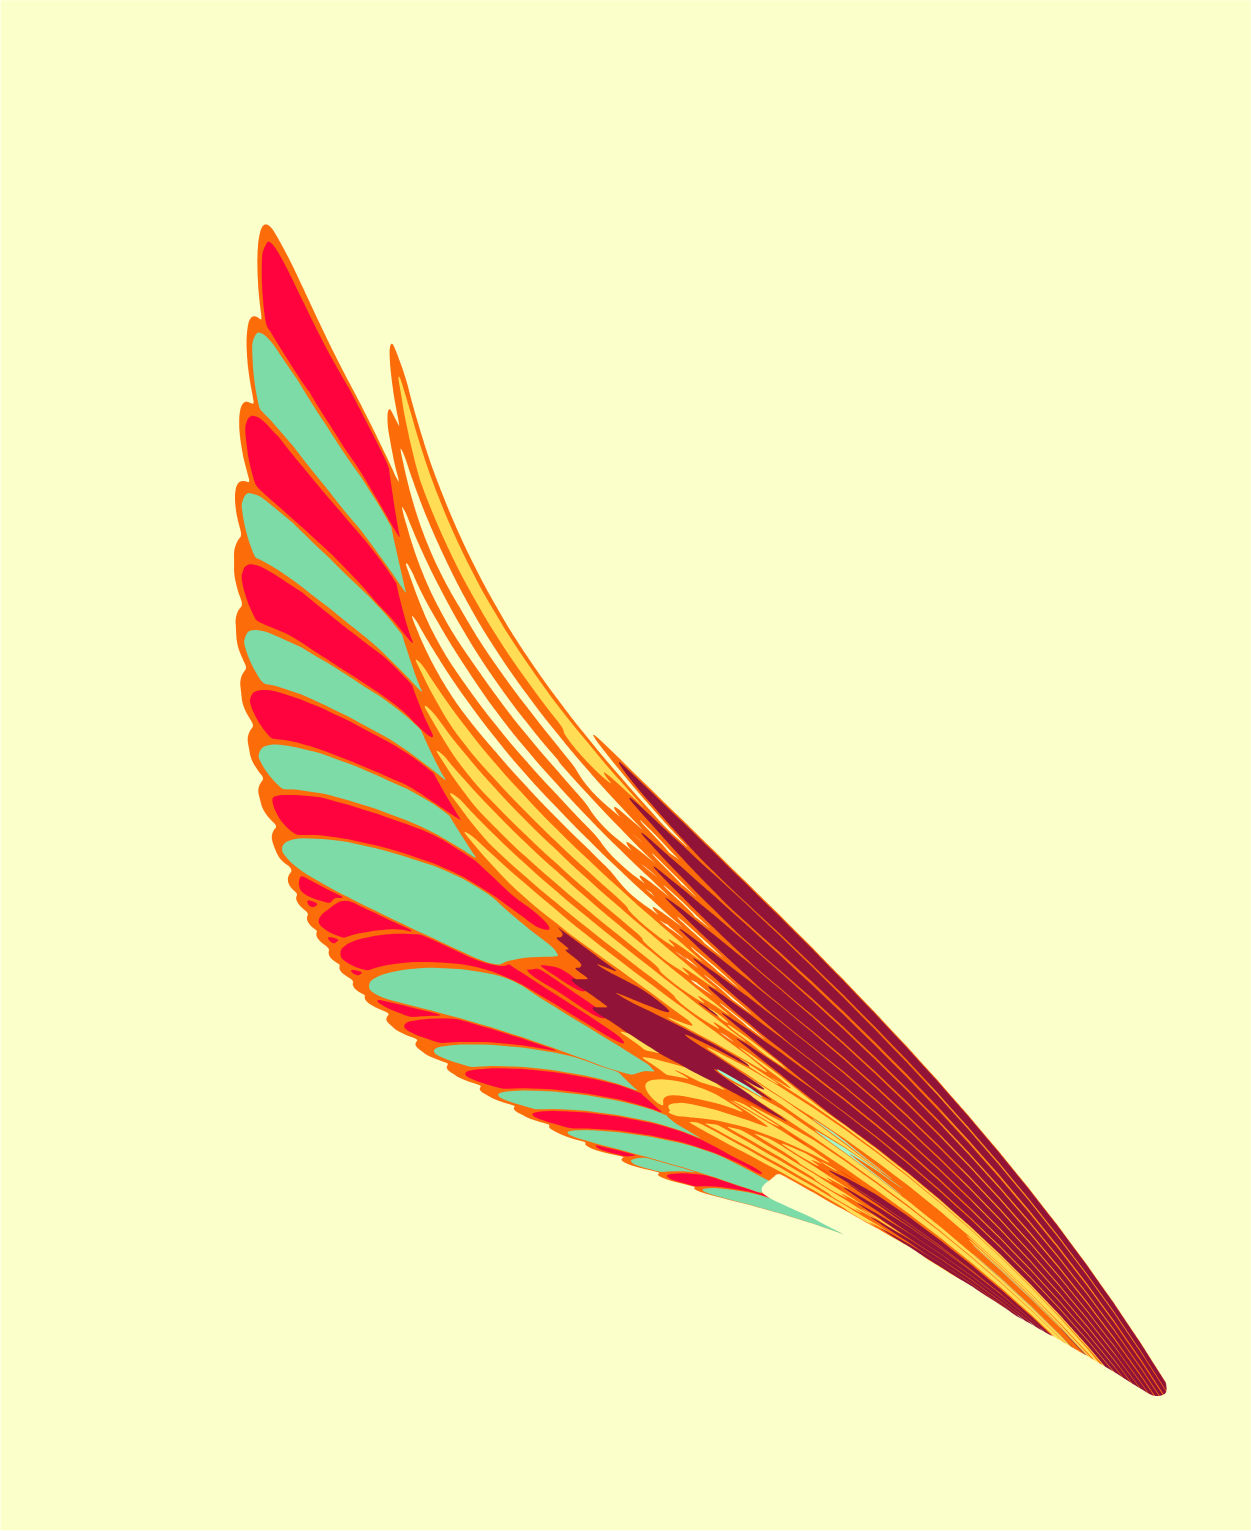 feather art,feathers art,art,artwork,eysneya balance art & graphics,graphics,graphic design elements,dopemainequation,graphic pack,graphic suit,graphic objects,transparent png,png,image files,wings art,bohemian art,digital art,industrial art,tropical